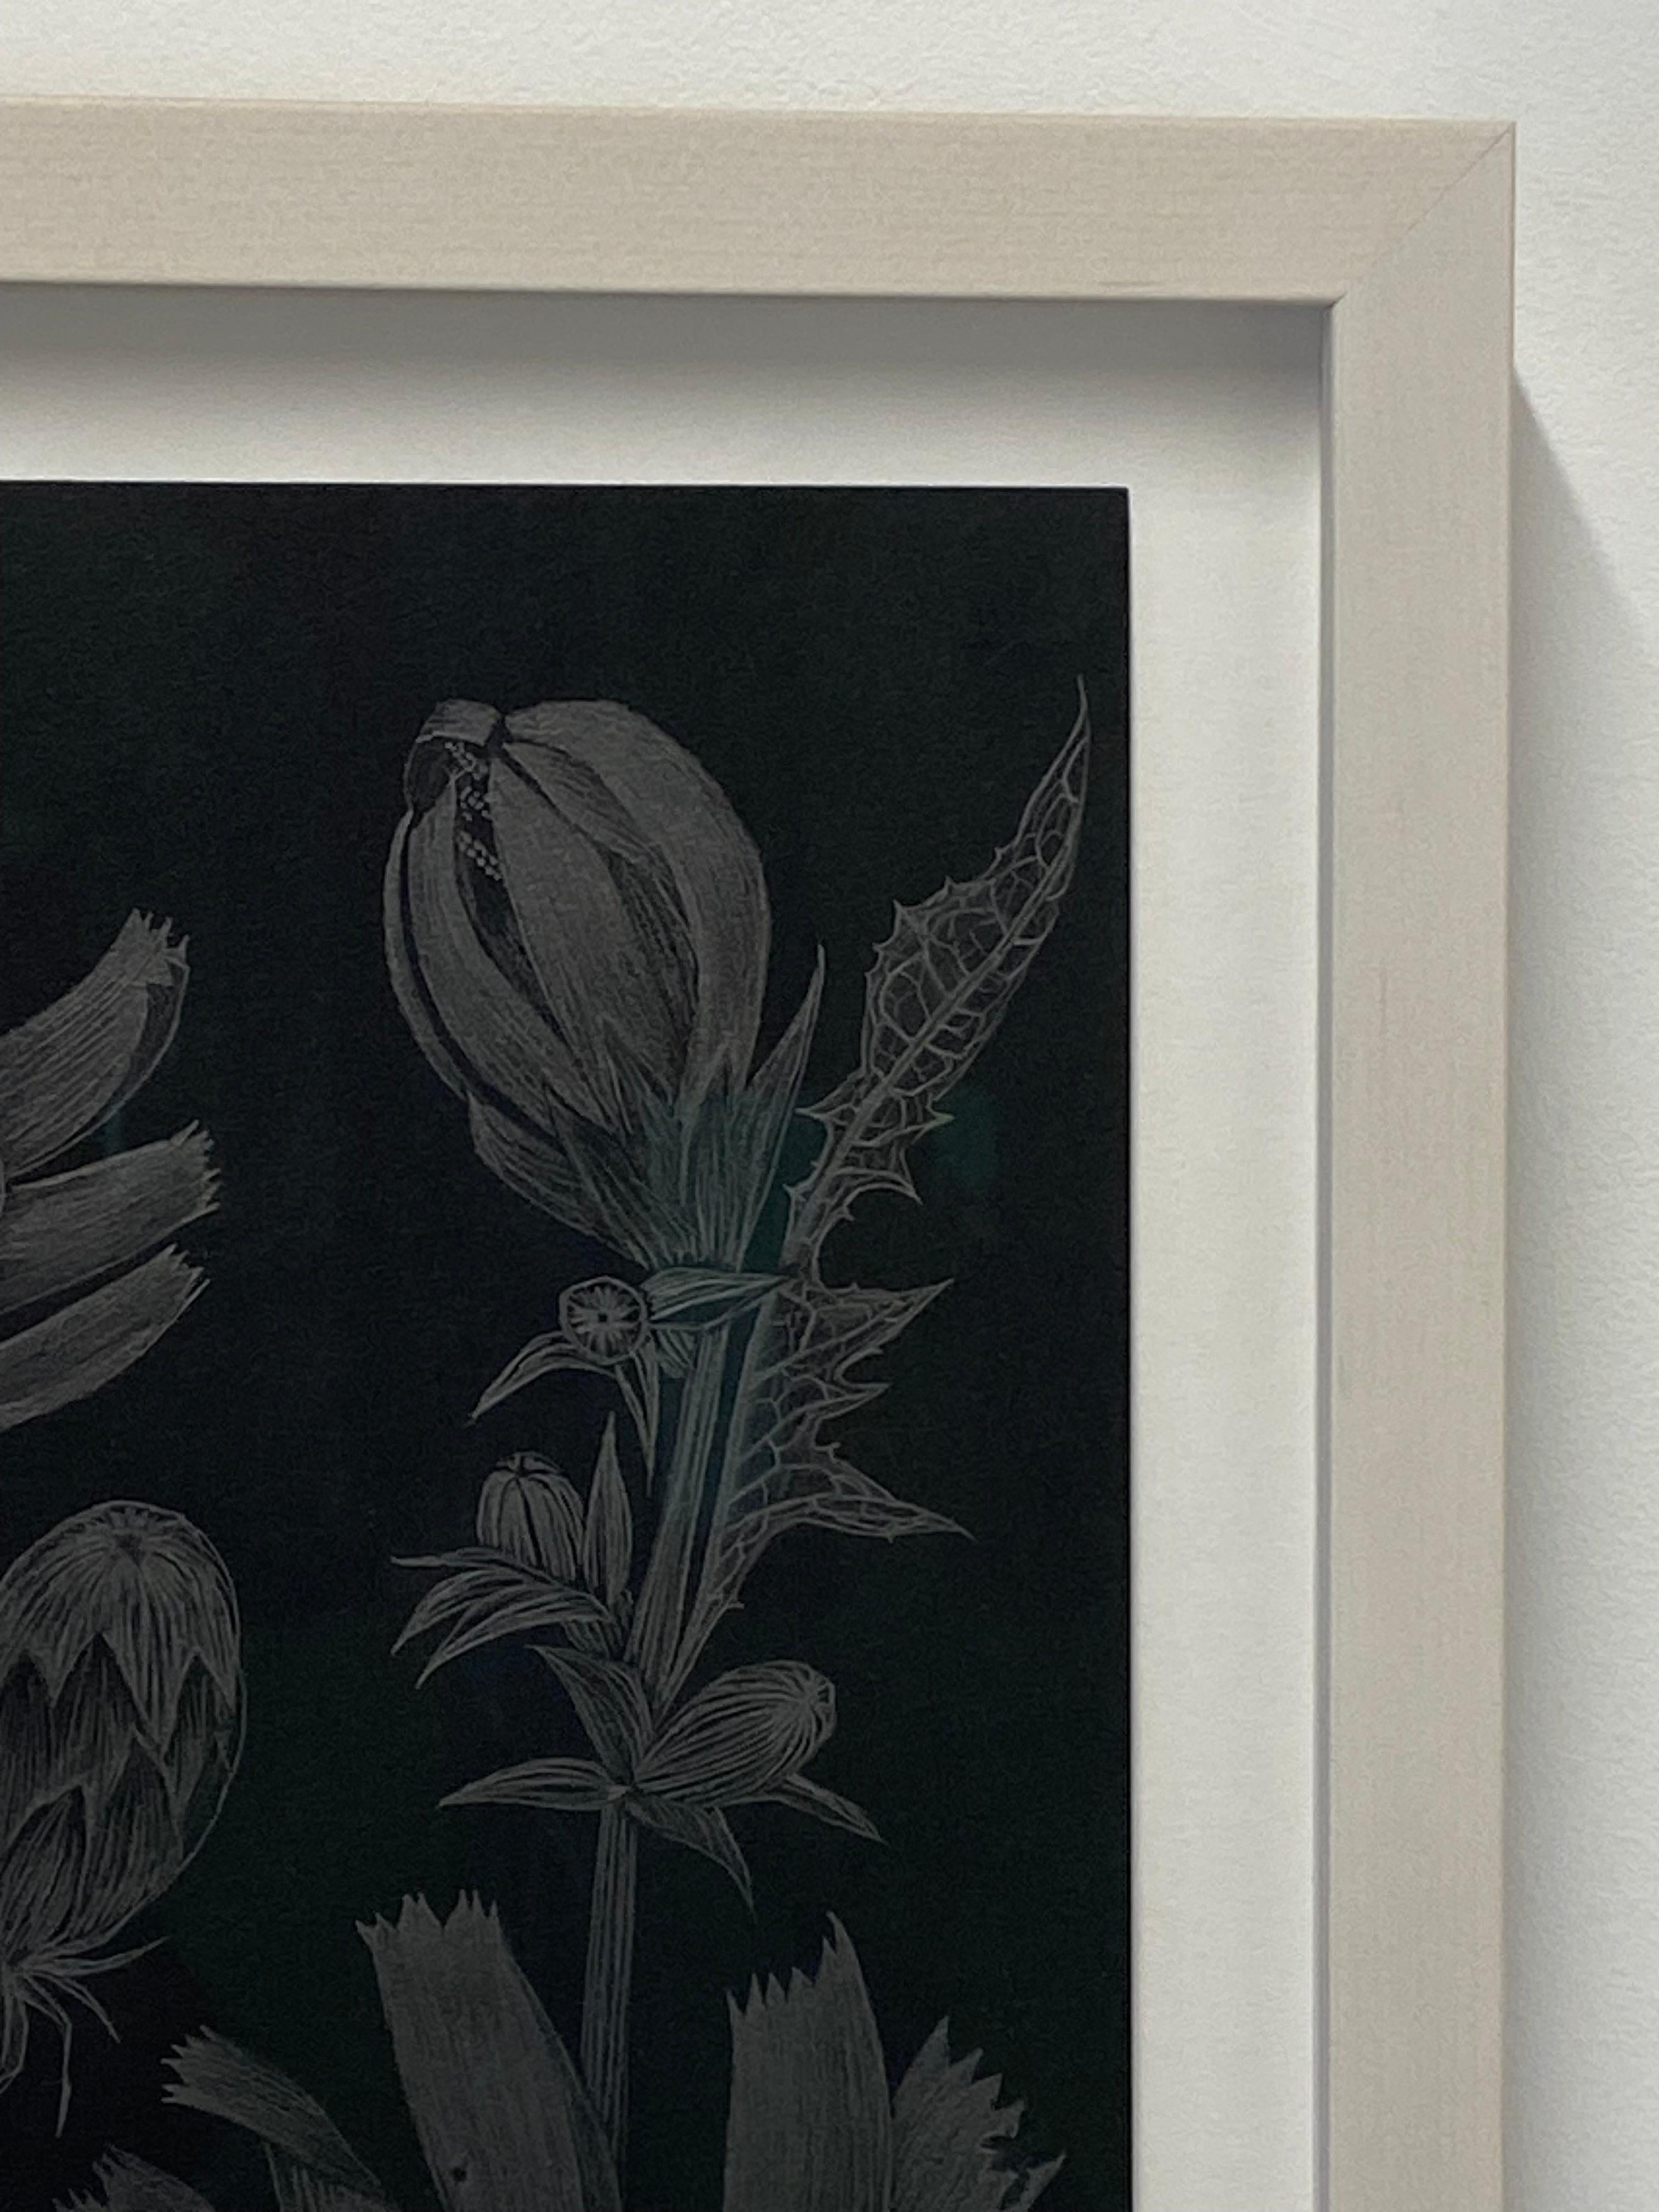 Chicory Two, Botanical Drawing on Black, Metallic Silver Flowers, Leaves, Buds 8